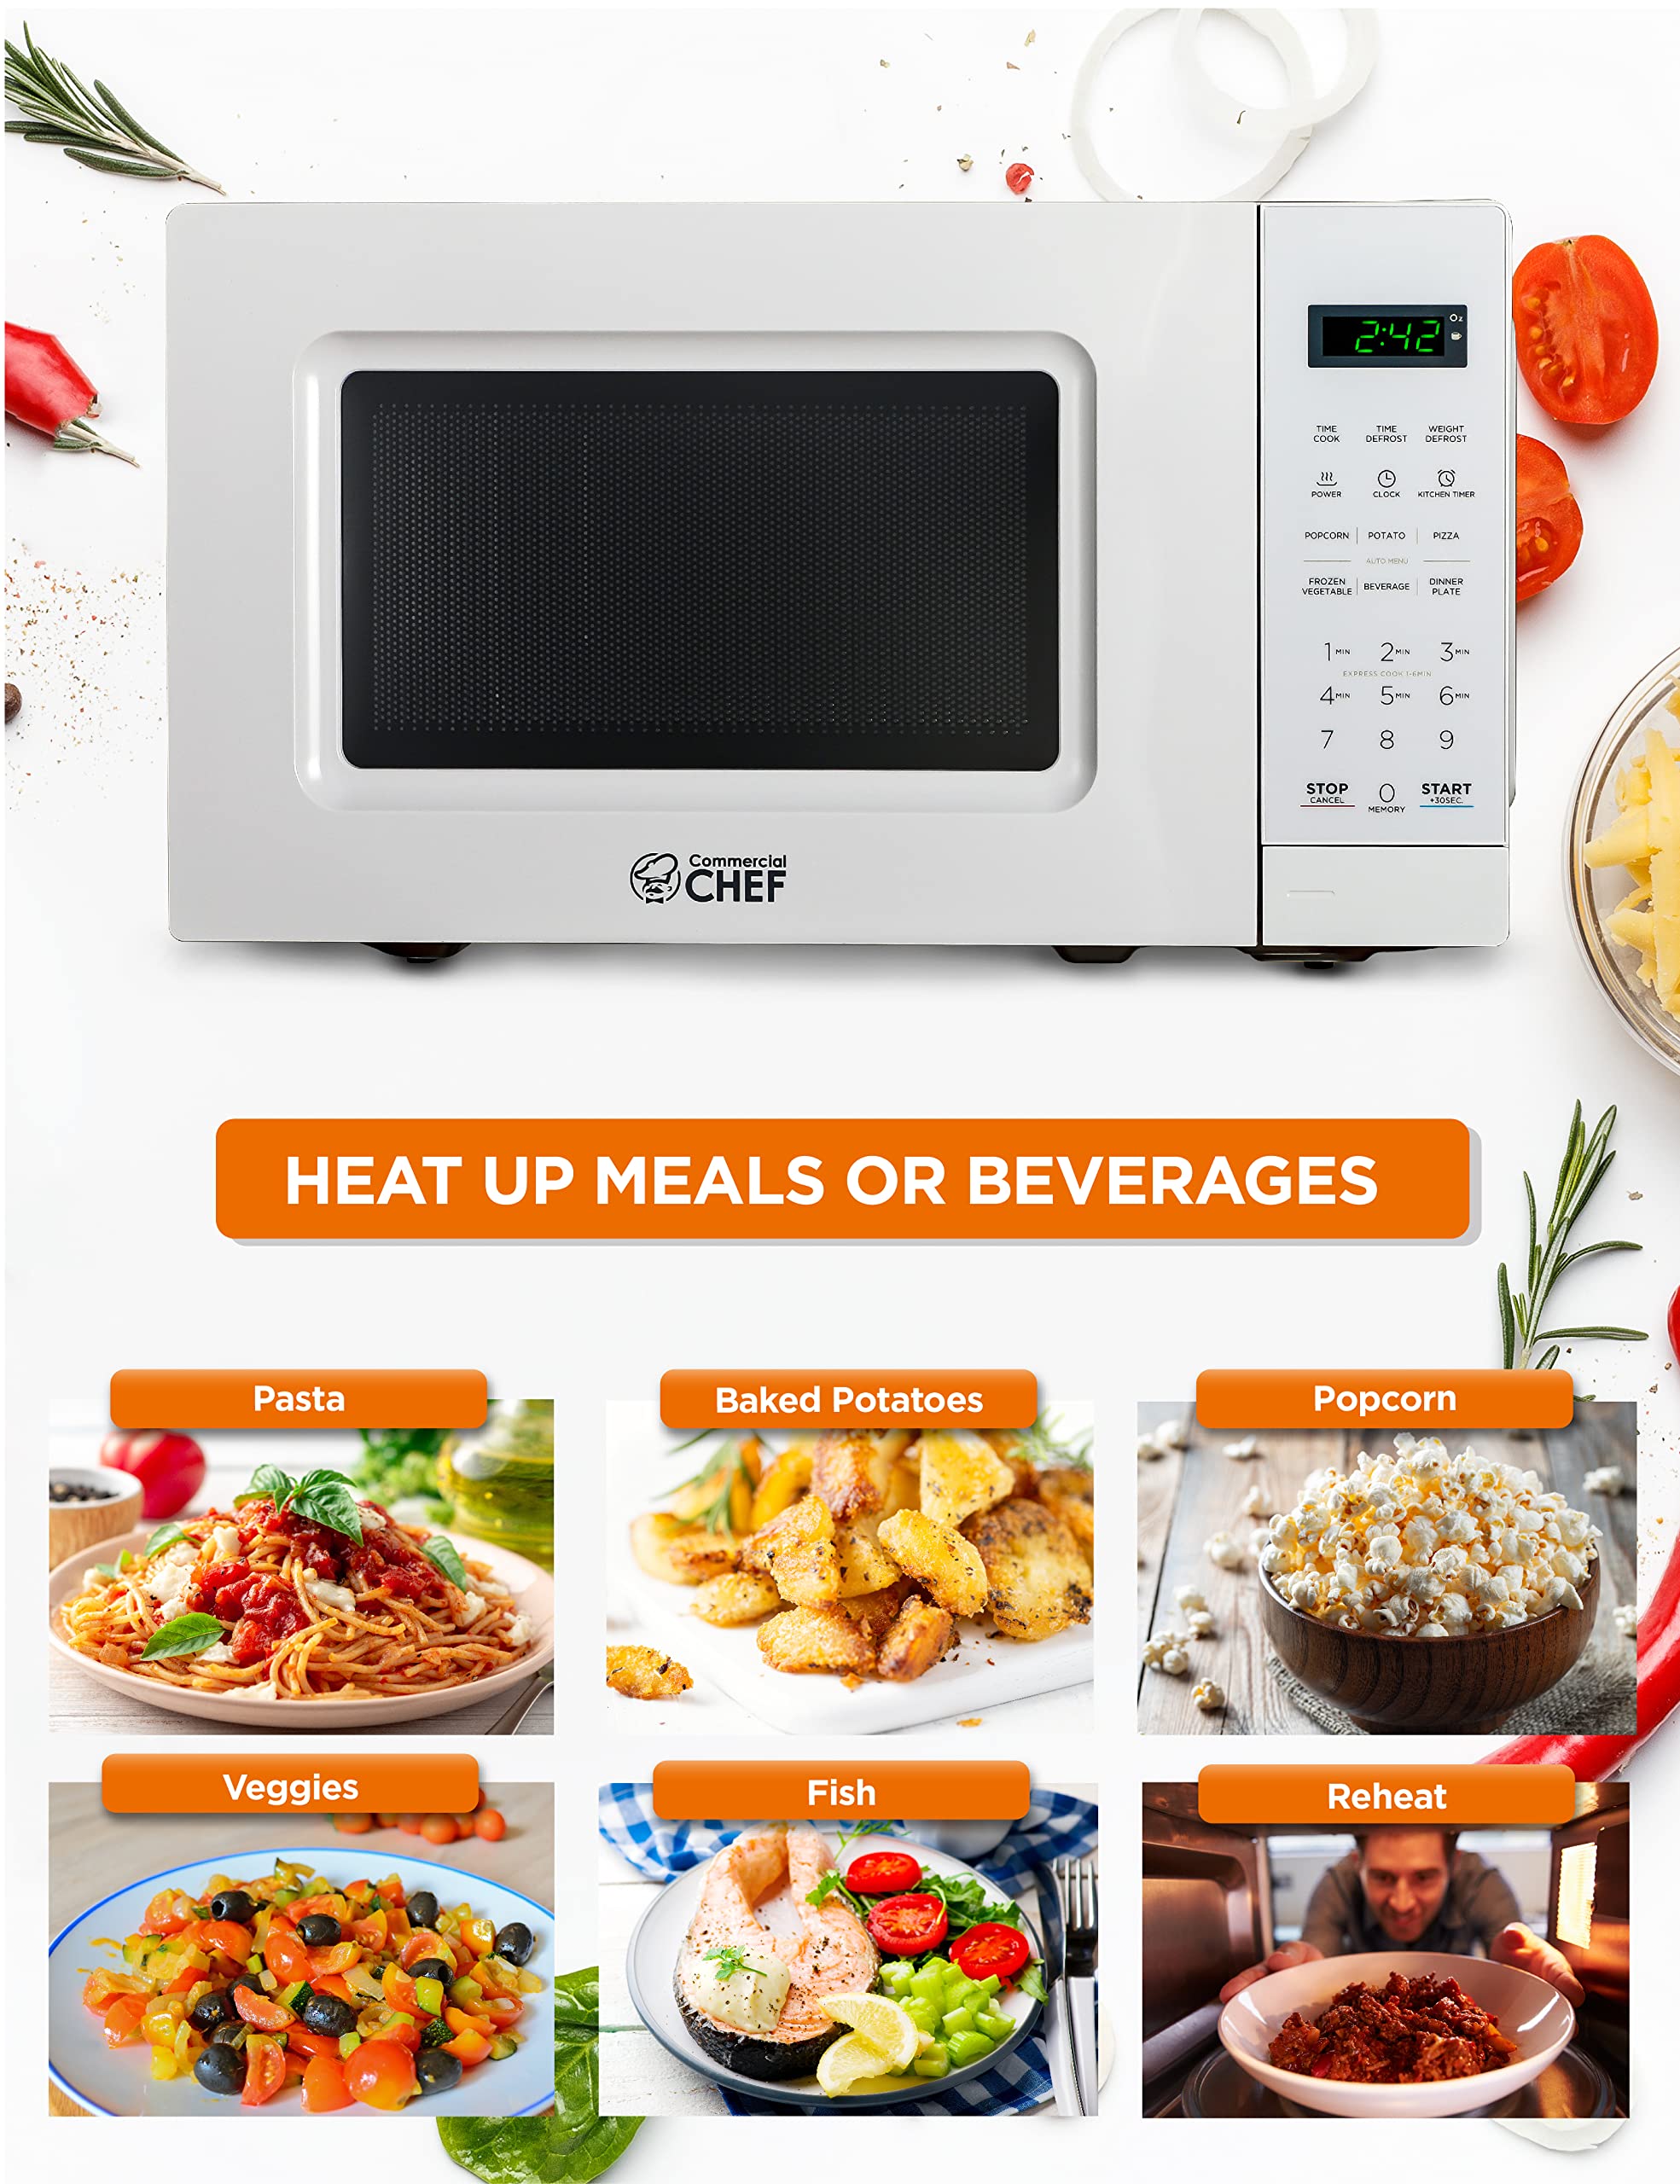 COMMERCIAL CHEF 0.7 Cu Ft Microwave with 10 Power Levels, 700W Microwave with Digital Display, Countertop Microwave with Child Safety Door Lock, Programmable with Push Button, White